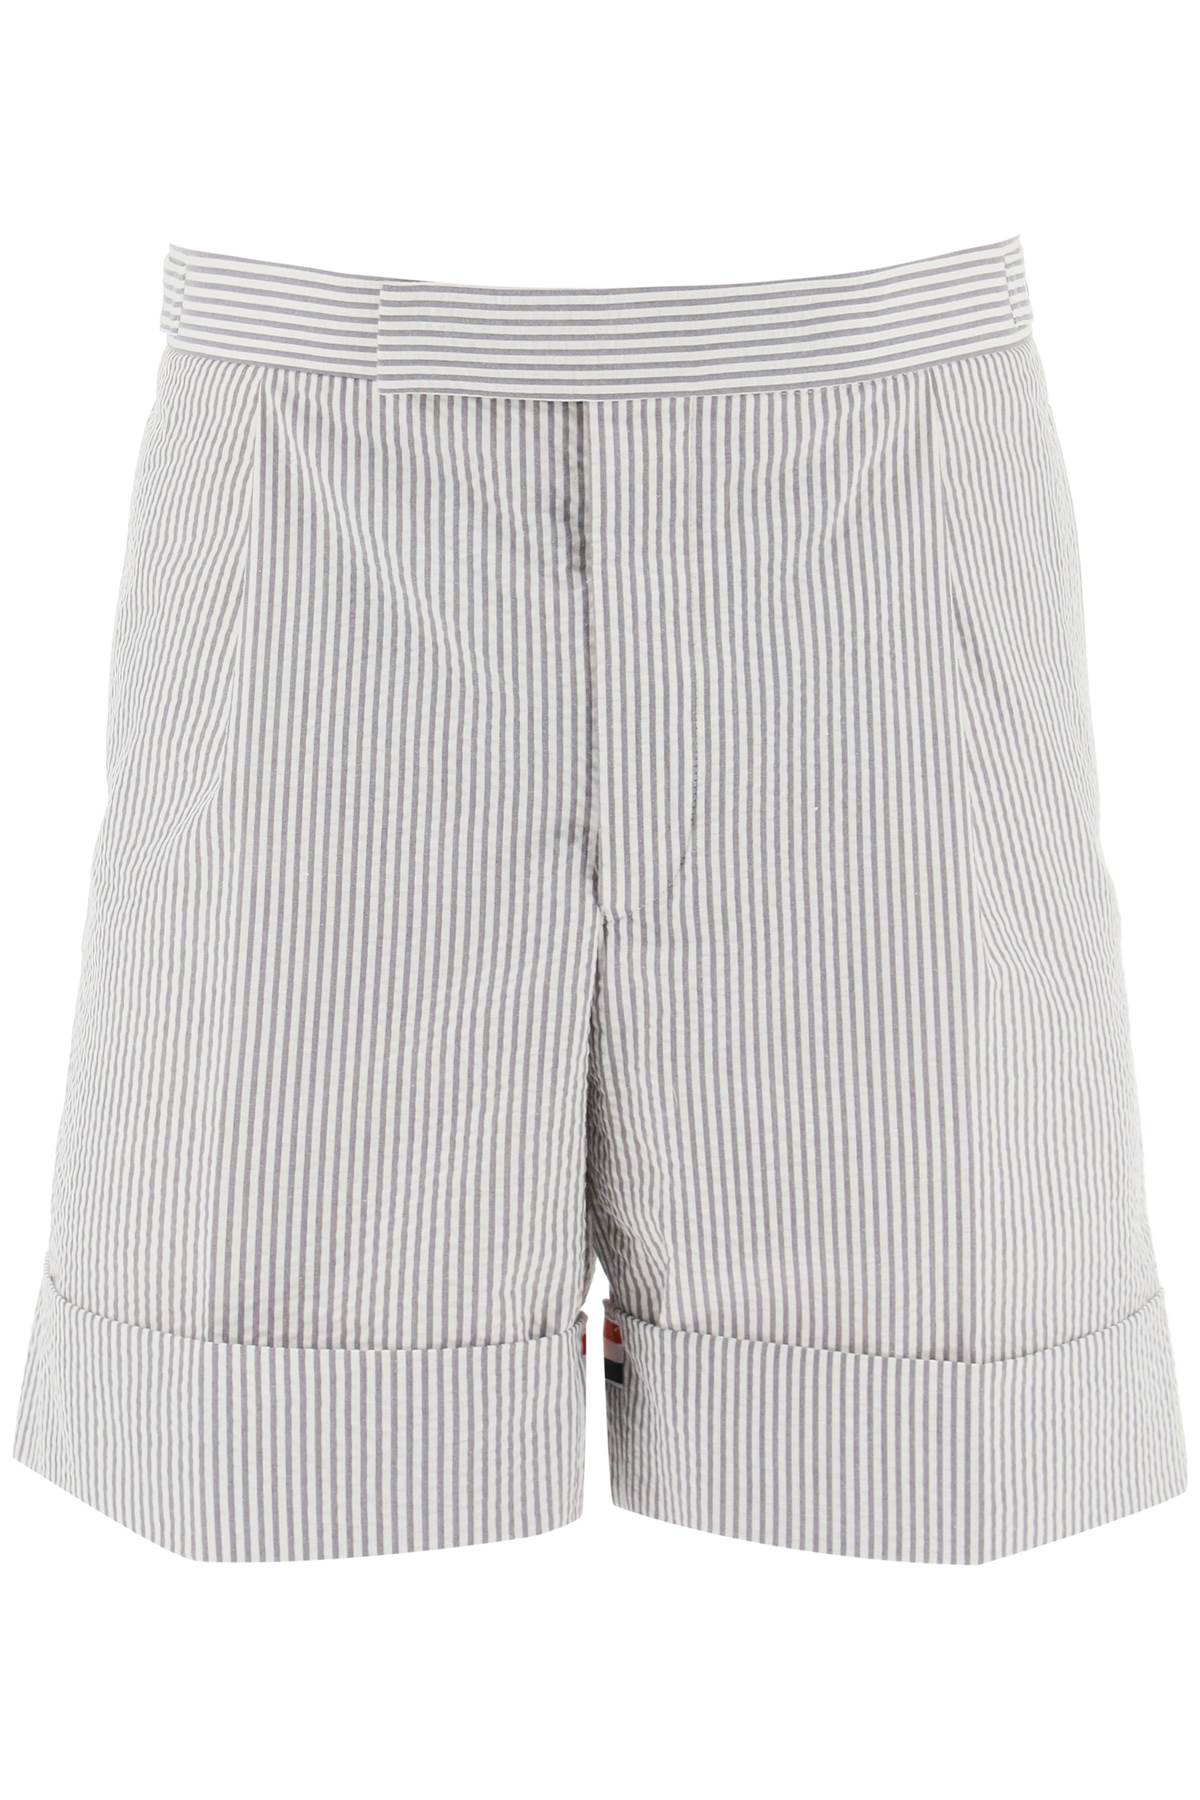 Shop Thom Browne Striped Shorts With Tricolor Details In White,grey